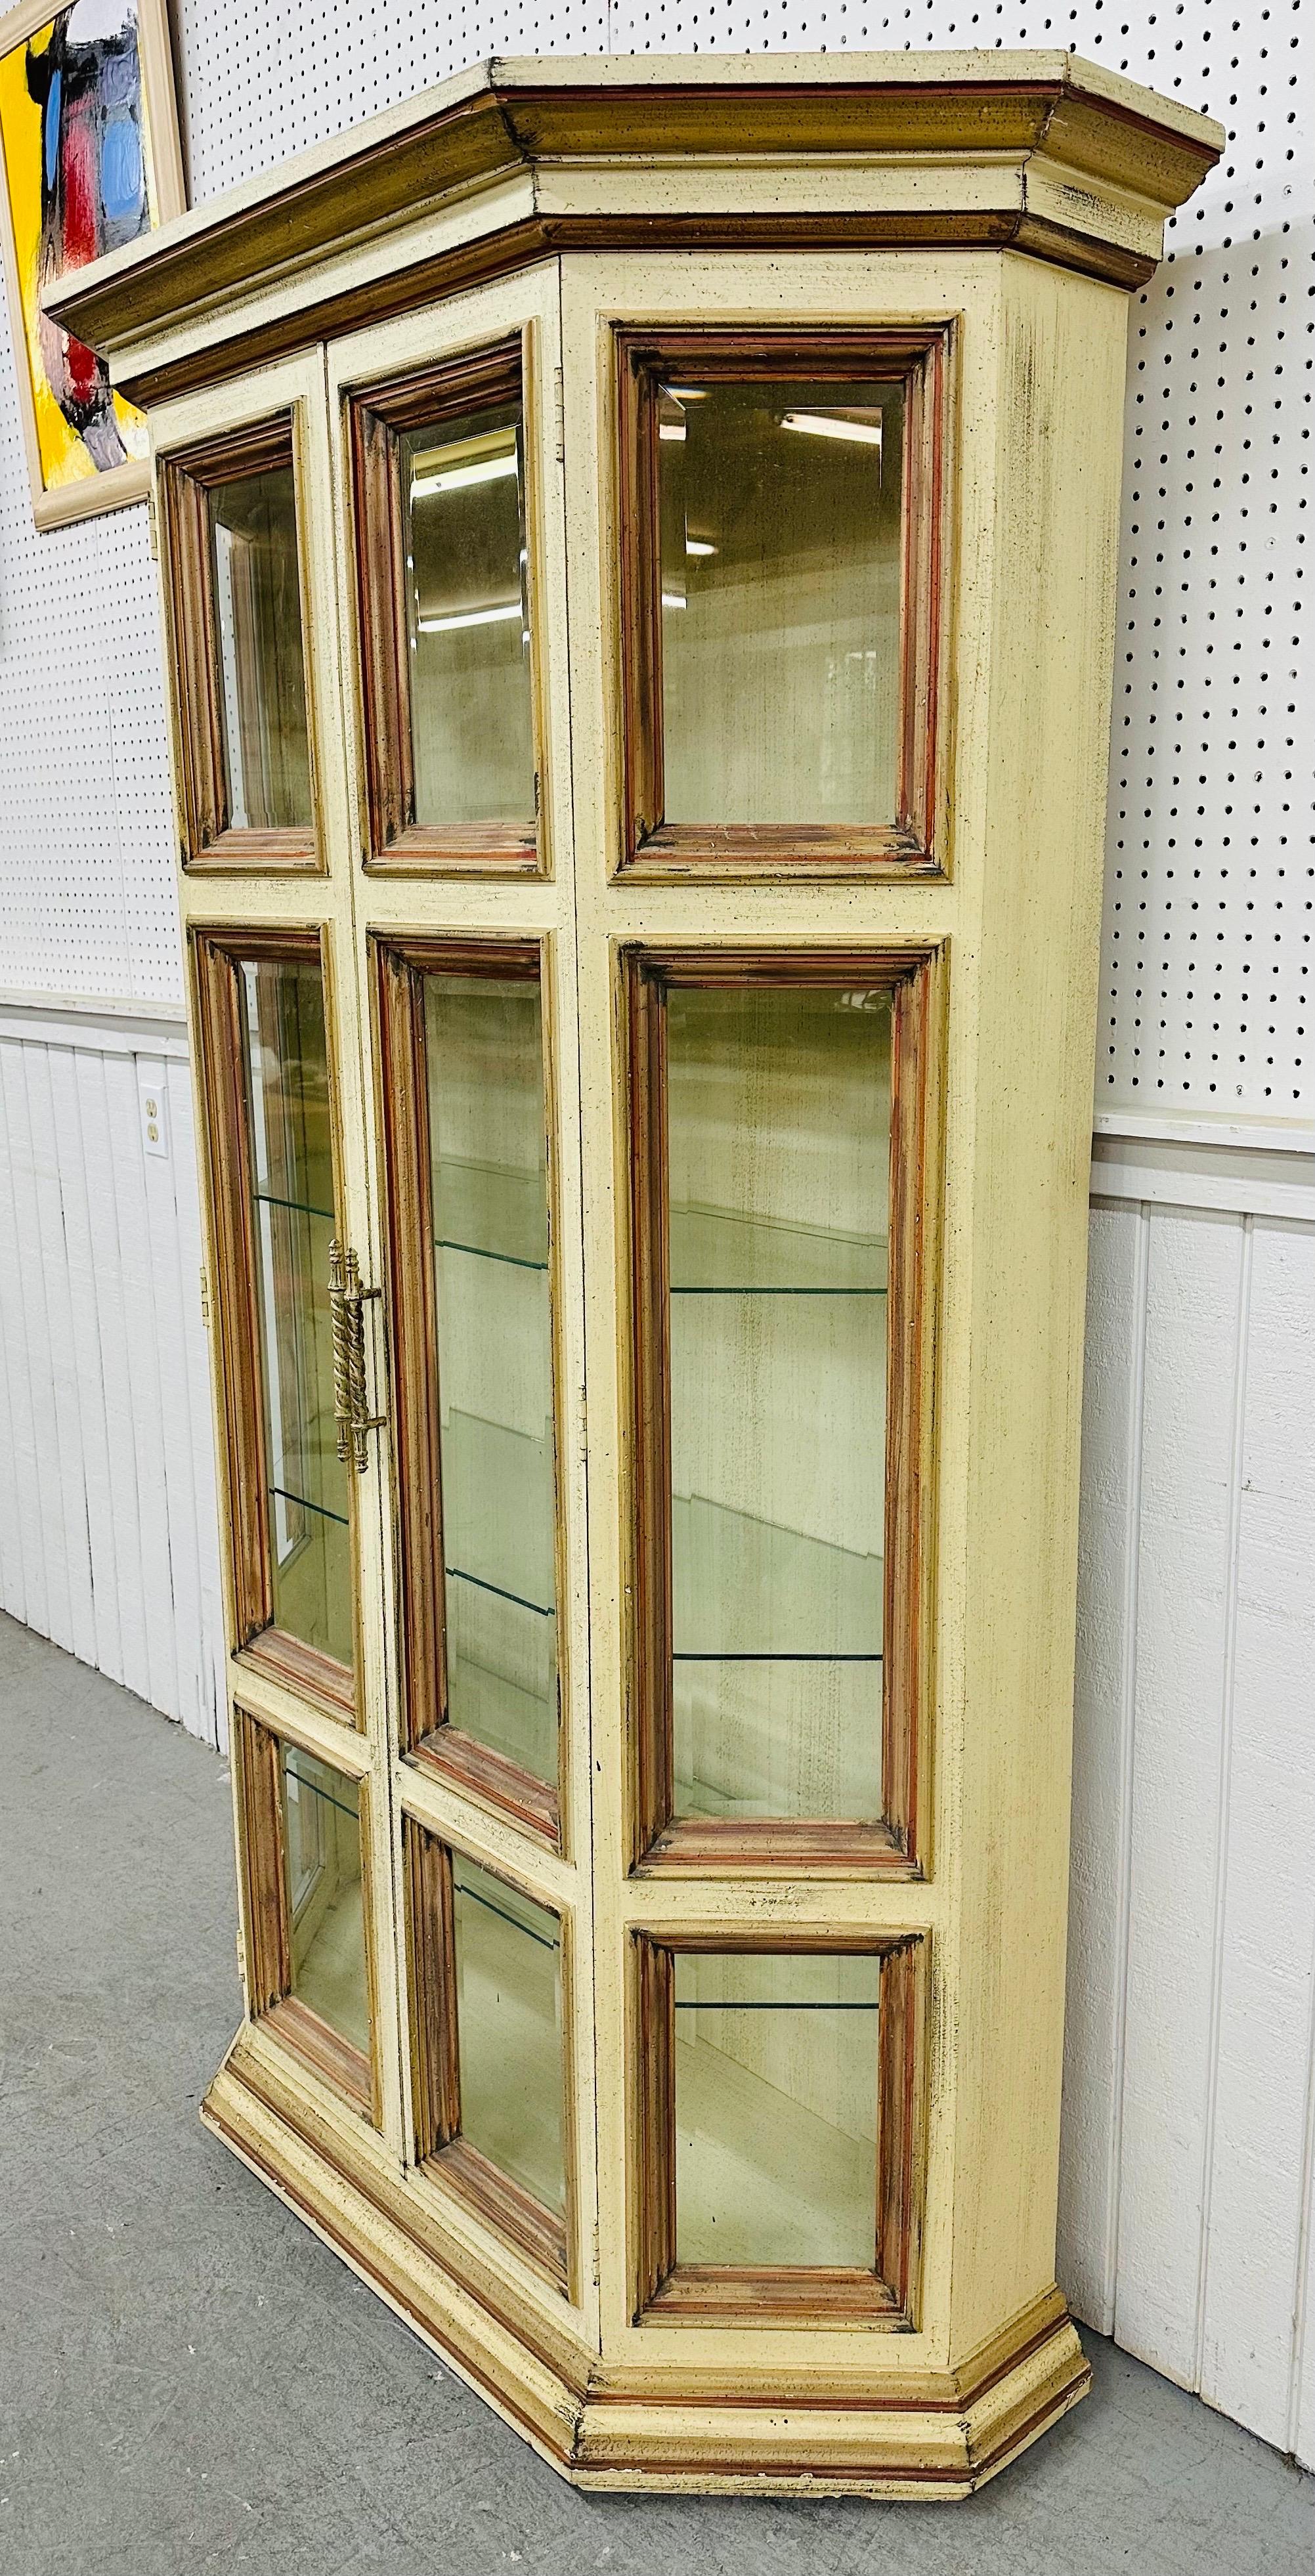 This listing is for a Vintage Distressed Glass Display Cabinet. Featuring two doors that open up to removable glass shelves, interior light, multiple glass panels for display, and a beautiful antique distressed finish. This is an exceptional